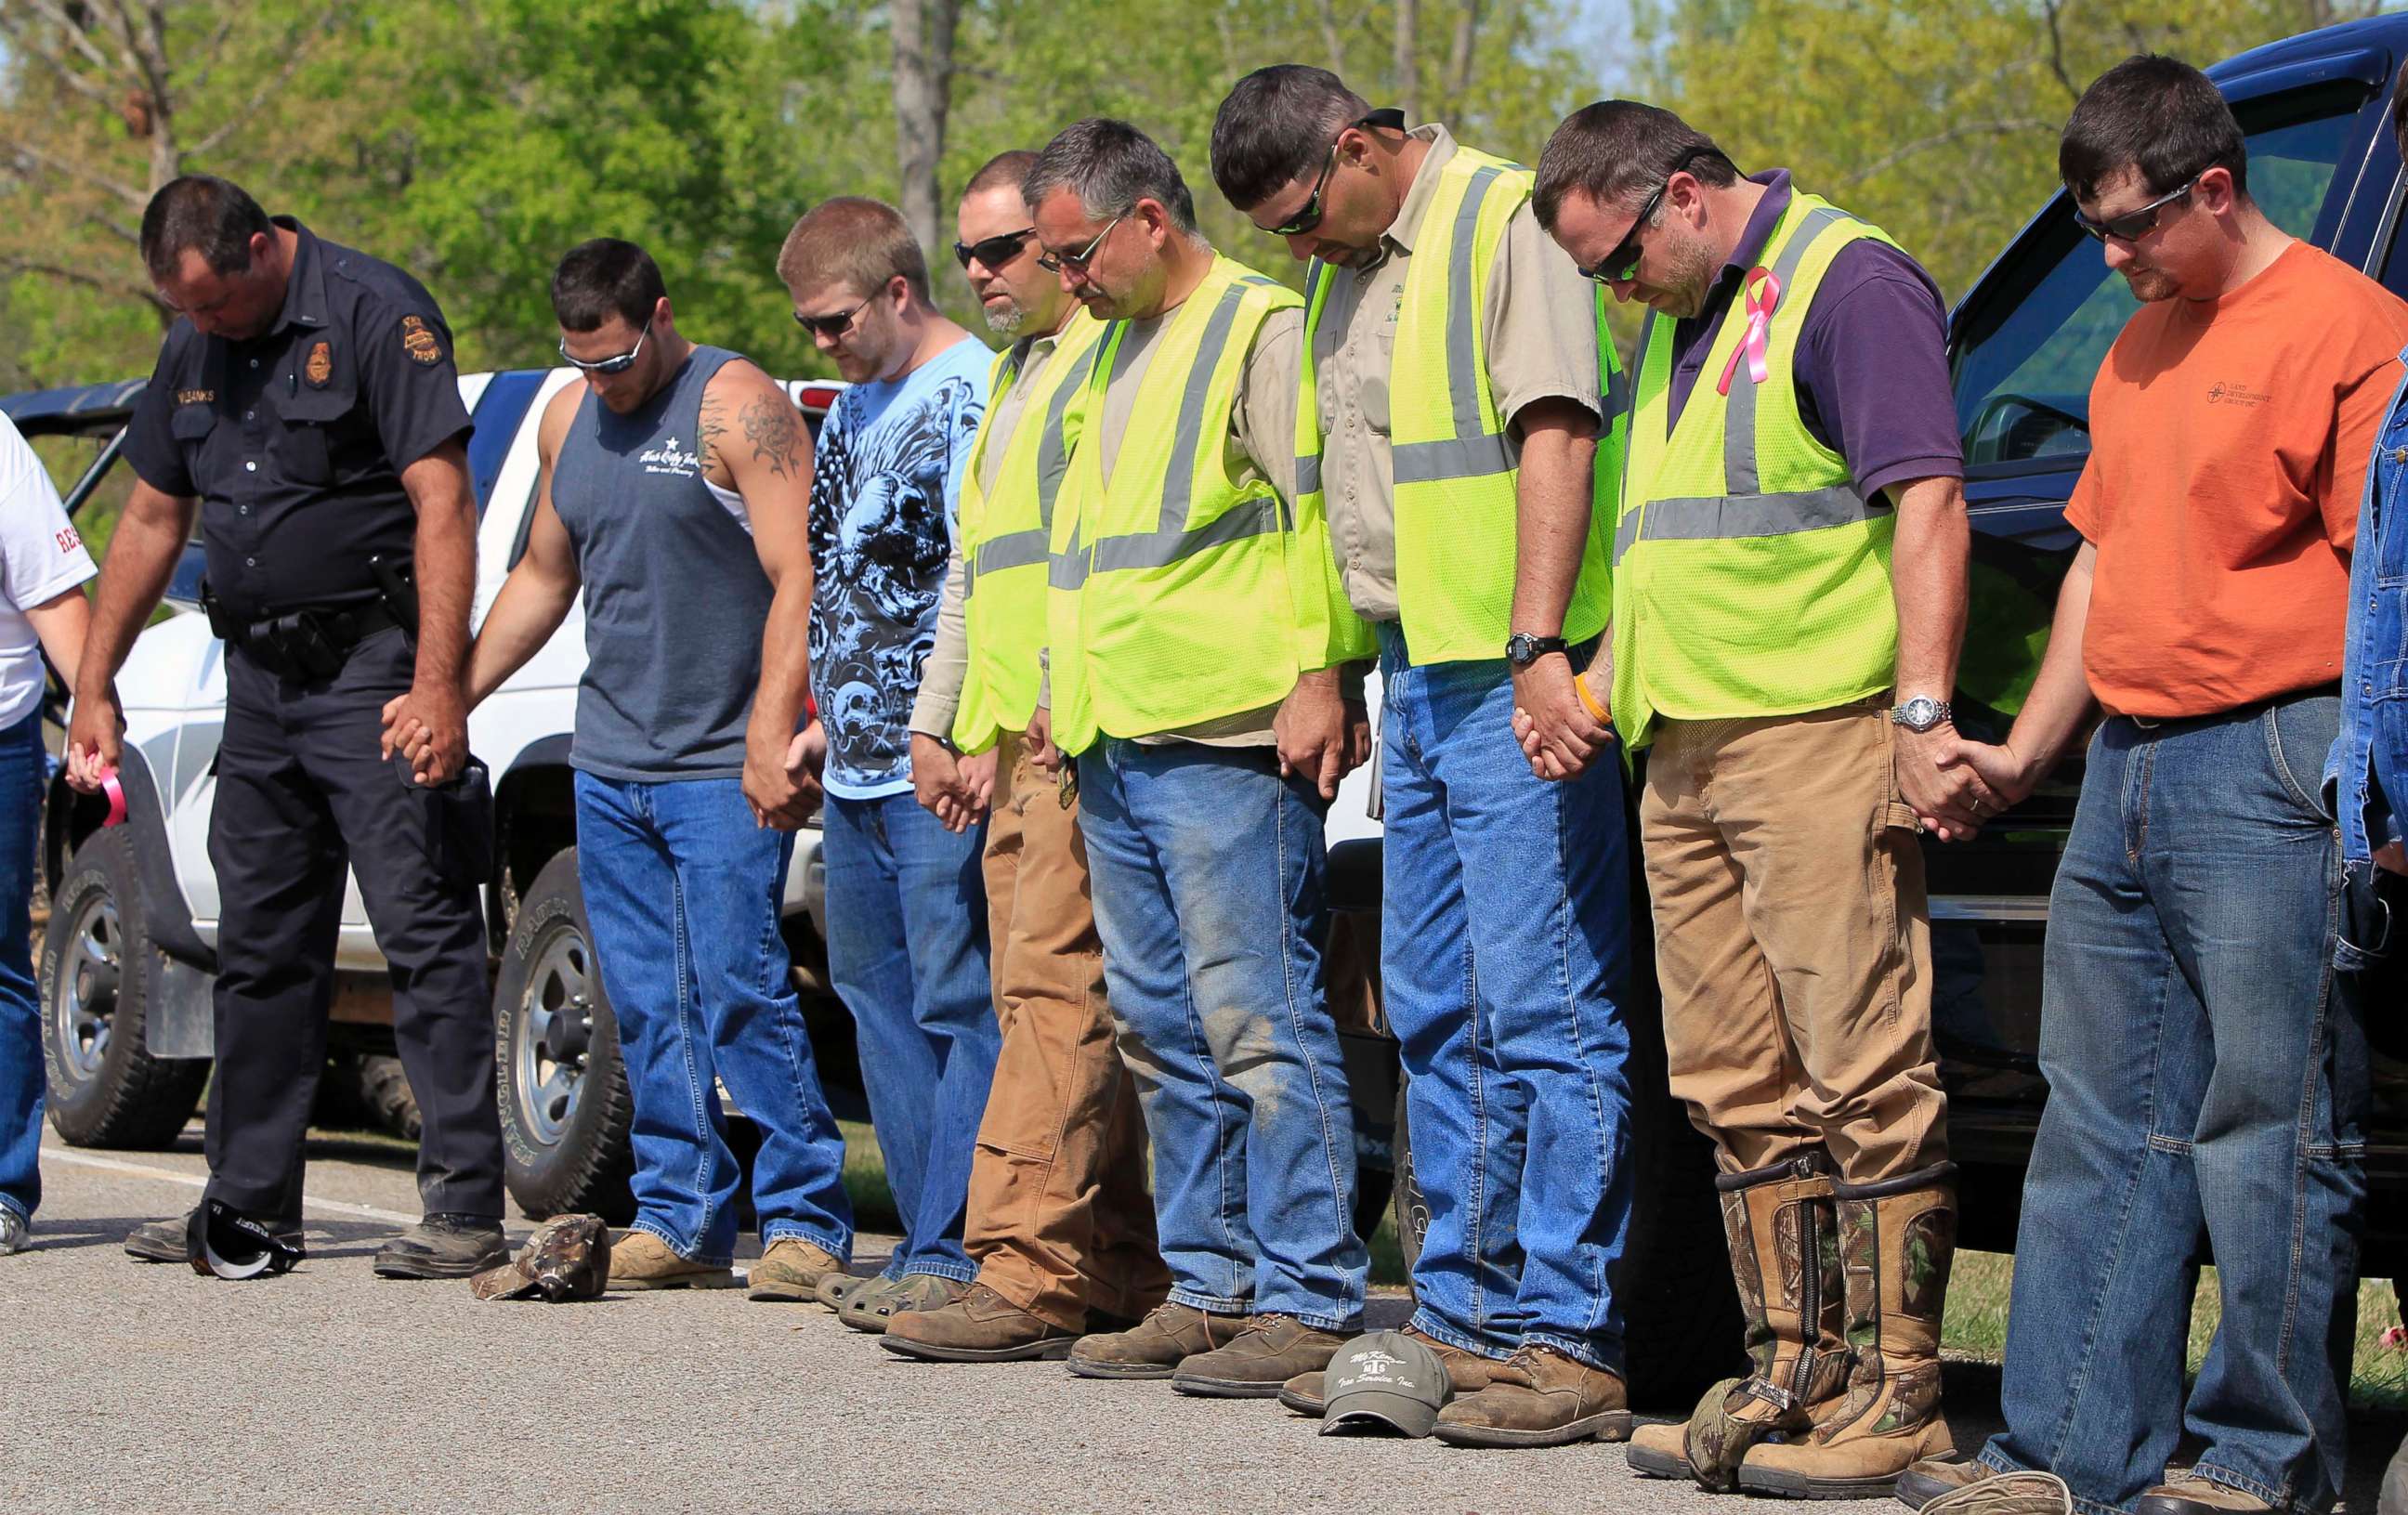 PHOTO: Rescue workers pray together, April 14, 2011, in Parsons, Tenn. 